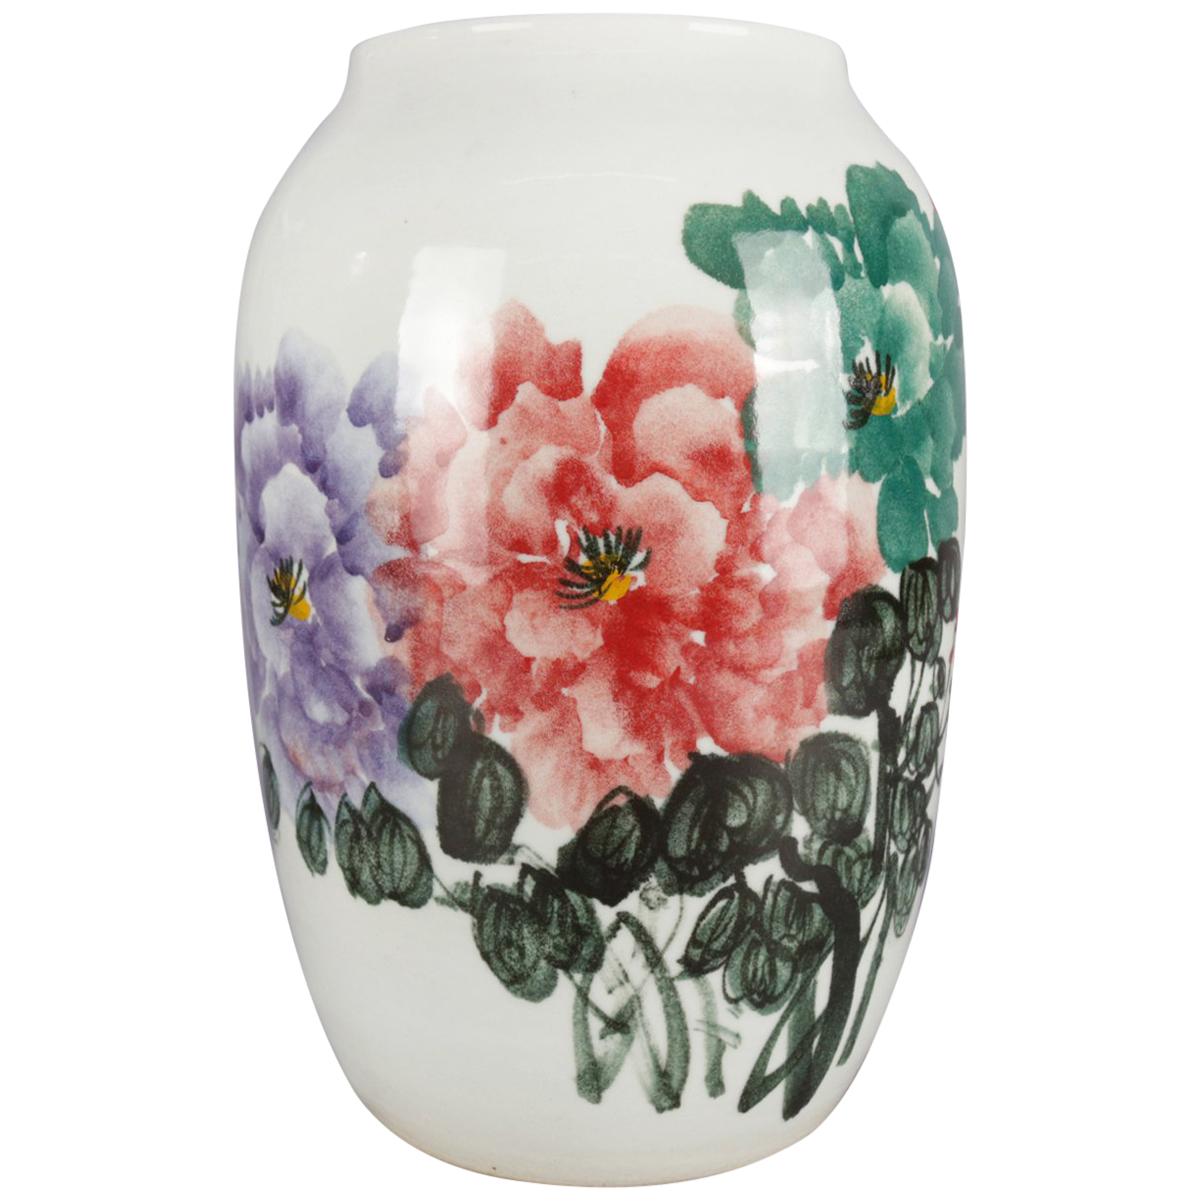 Chinese Hand-Painted Floral Porcelain Vase, Chop Mark Signed, 20th Century